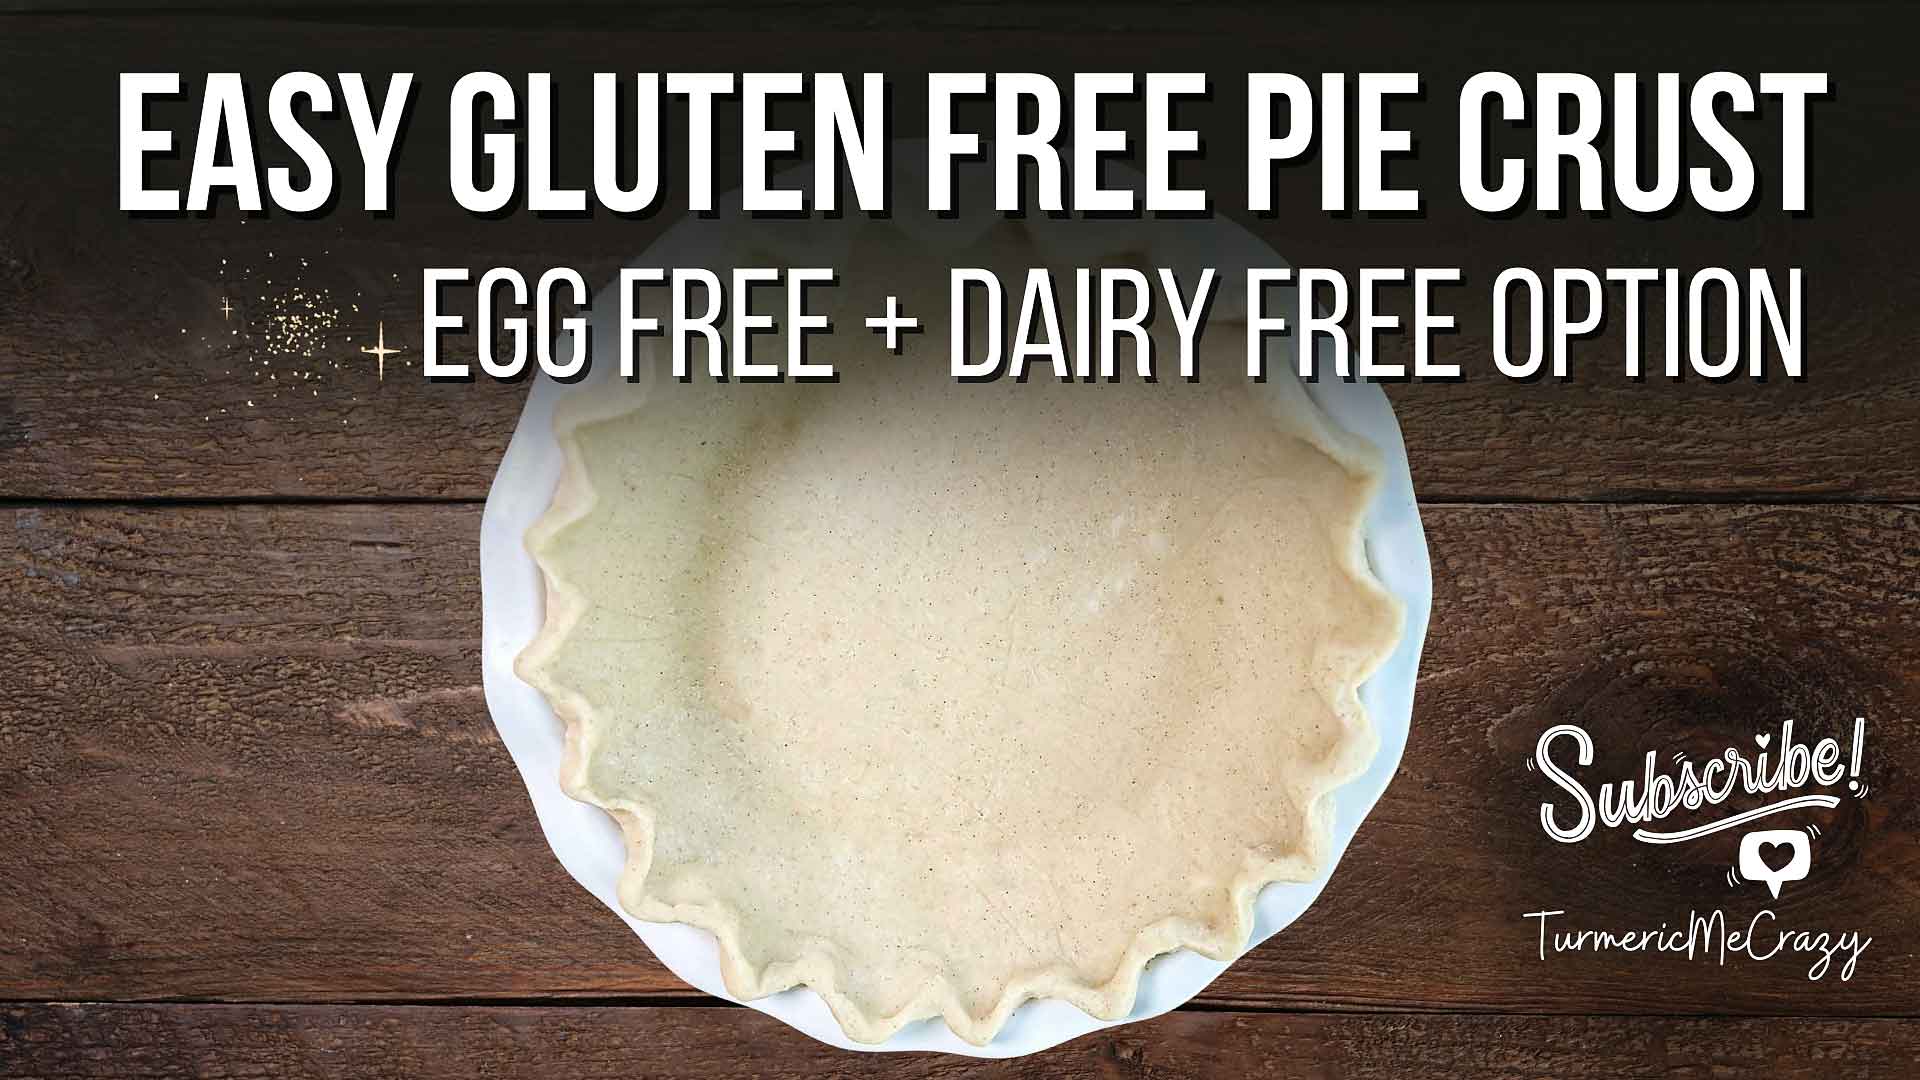 Indulge in the perfect pie experience with our gluten-free, egg-free pie crust recipe. Impossibly flaky, delightfully flavourful, and free from gluten, eggs or xanthan gum! With just 7 natural and simple ingredients, this easy pie crust is a dream. Discover the secret to a crust that's both wholesome and irresistible. Plus, I'll also show you my fool proof rolling & transferring technique, how to form a fluted pie rim and how to make a lattice pie crust top! #glutenfreeeggfreepiecrust #easypiecrust #easyglutenfreepiecrust